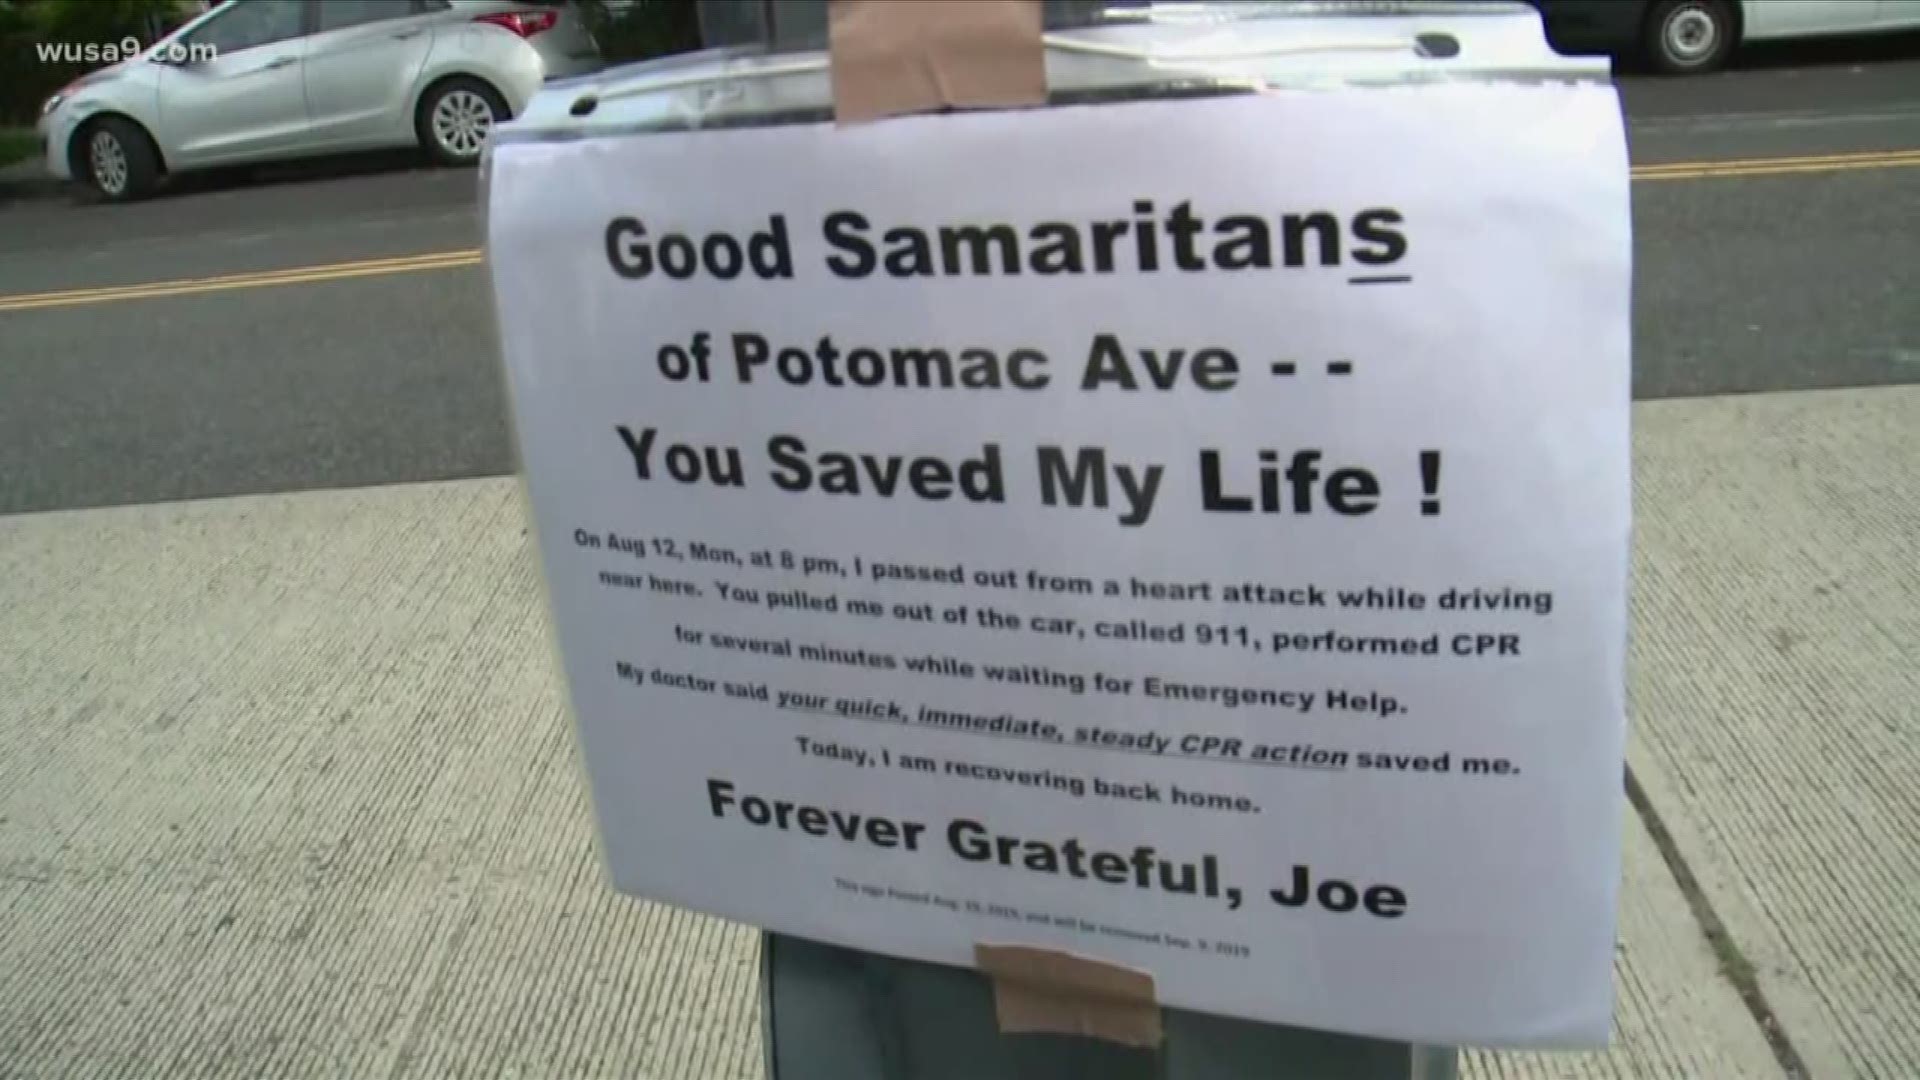 A sign posted in Southeast got our attention Wednesday after it was spread far and wide on social media. It's a thank you note for residents who rushed to a man's aid after he was hurt in a crash at the intersection of 13th Street and Potomac Avenue SE.